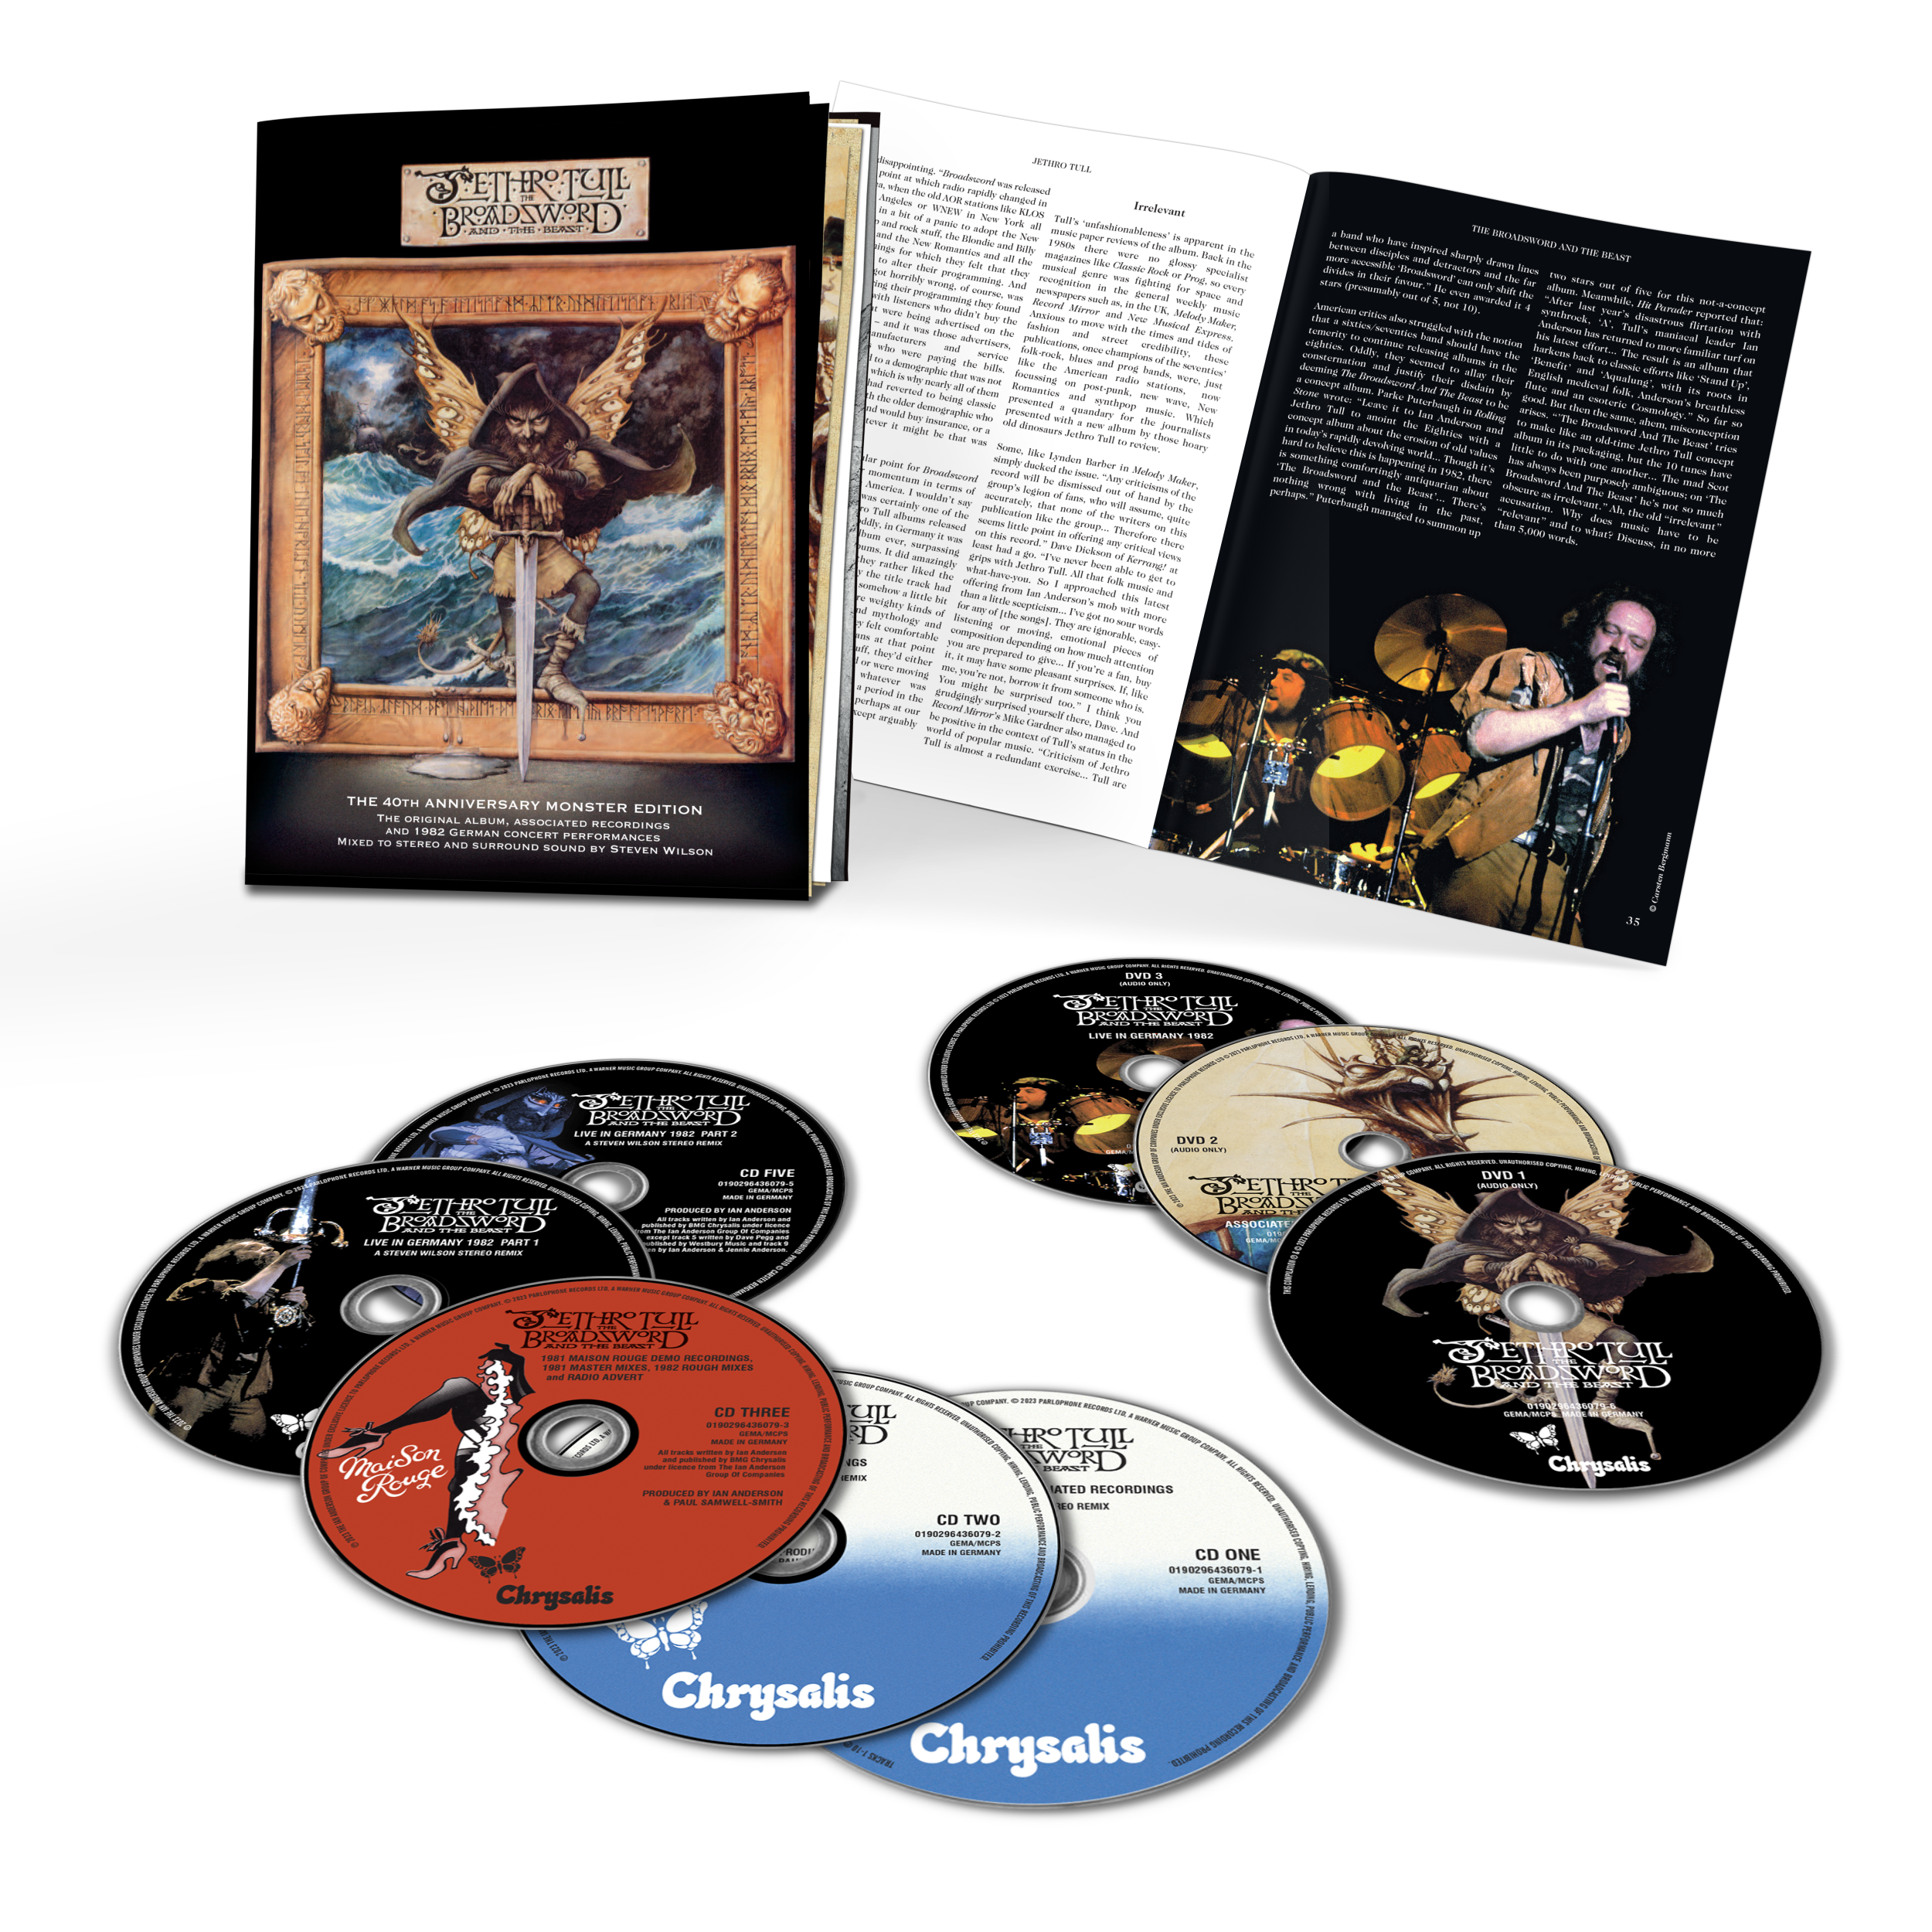 Jethro Tull - The Broadsword And The Beast (The 40th Anniversary Monster Edition): 5CD + 3DVD